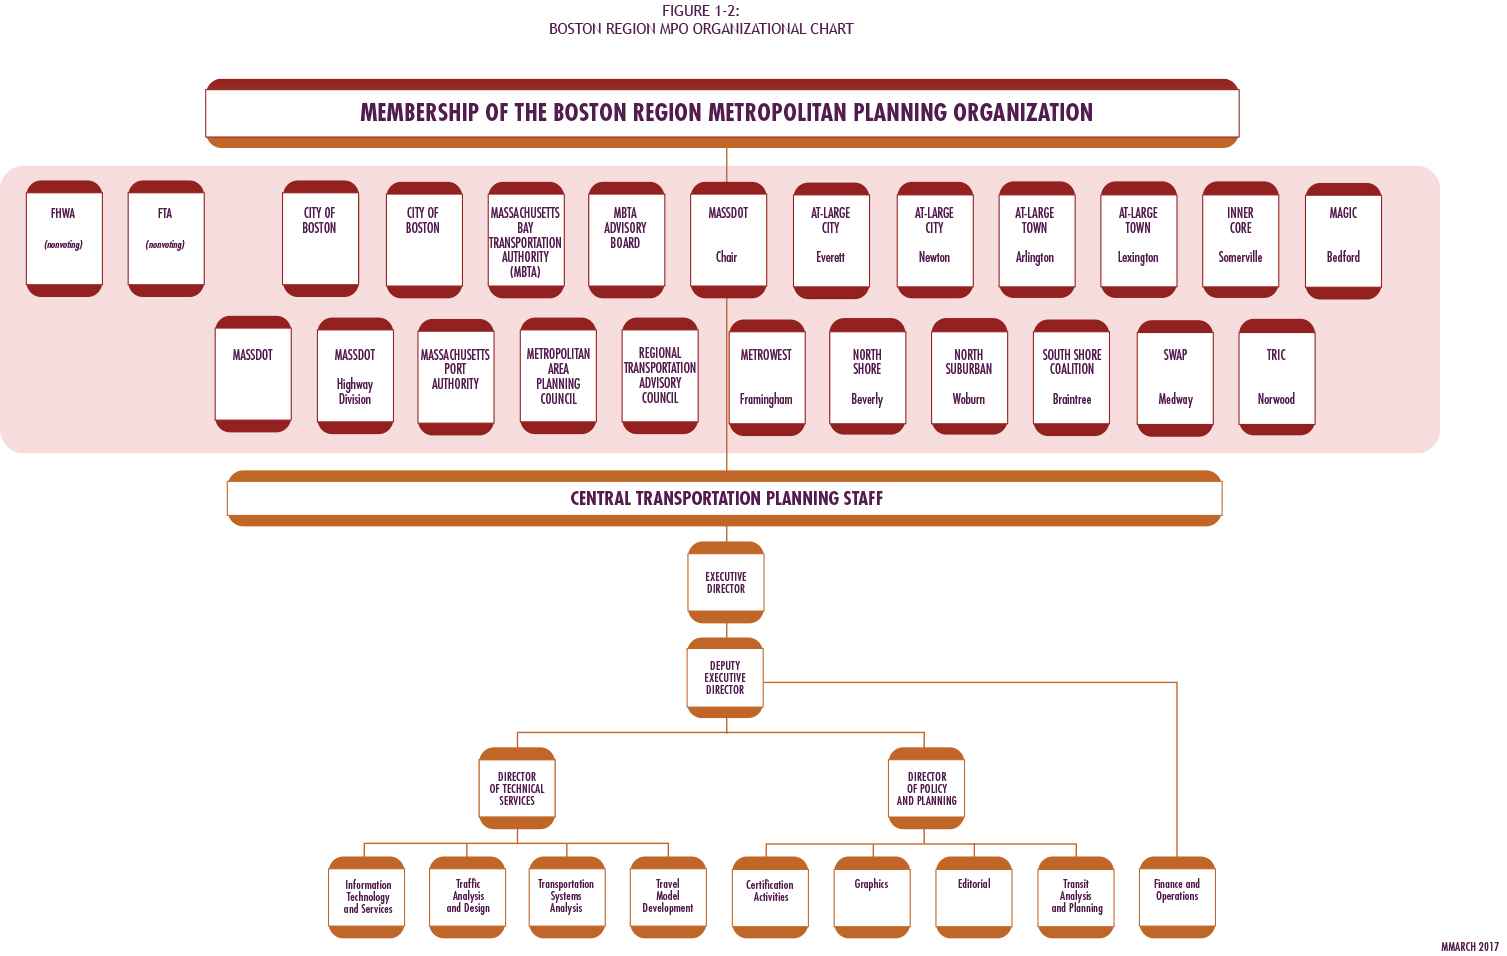 -	Figure 1-2: Boston Region MPO Organizational Chart: This figure shows the membership of the Boston Region Metropolitan Planning Organization, as described in the chapter, along with the organizational chart of the Central Transportation Planning Staff (CTPS) below.